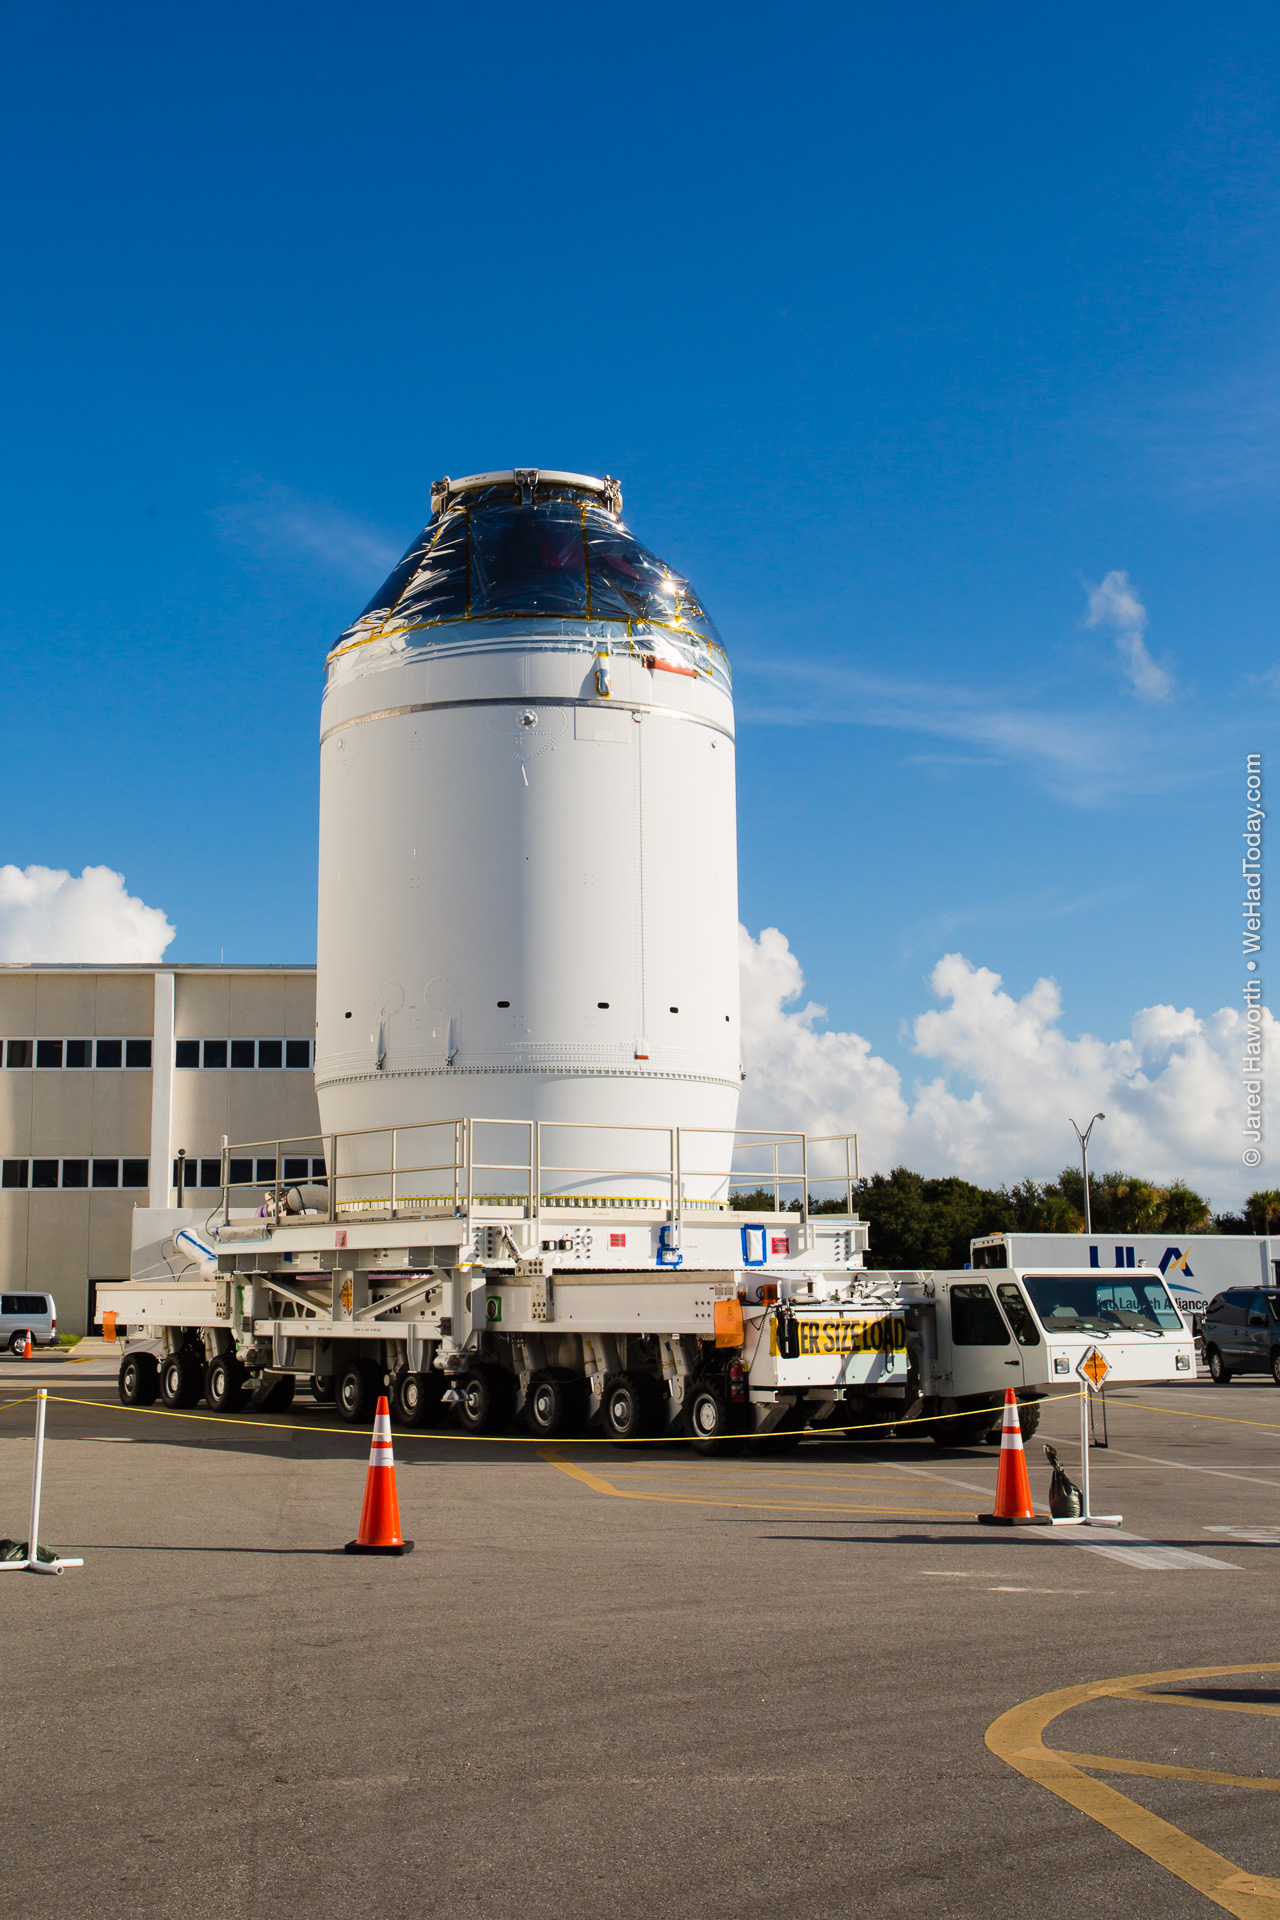 The Orion spacecraft, atop a 'dummy' service module, is prepared to move to the Payload Hazardous Servicing Facility for fueling.